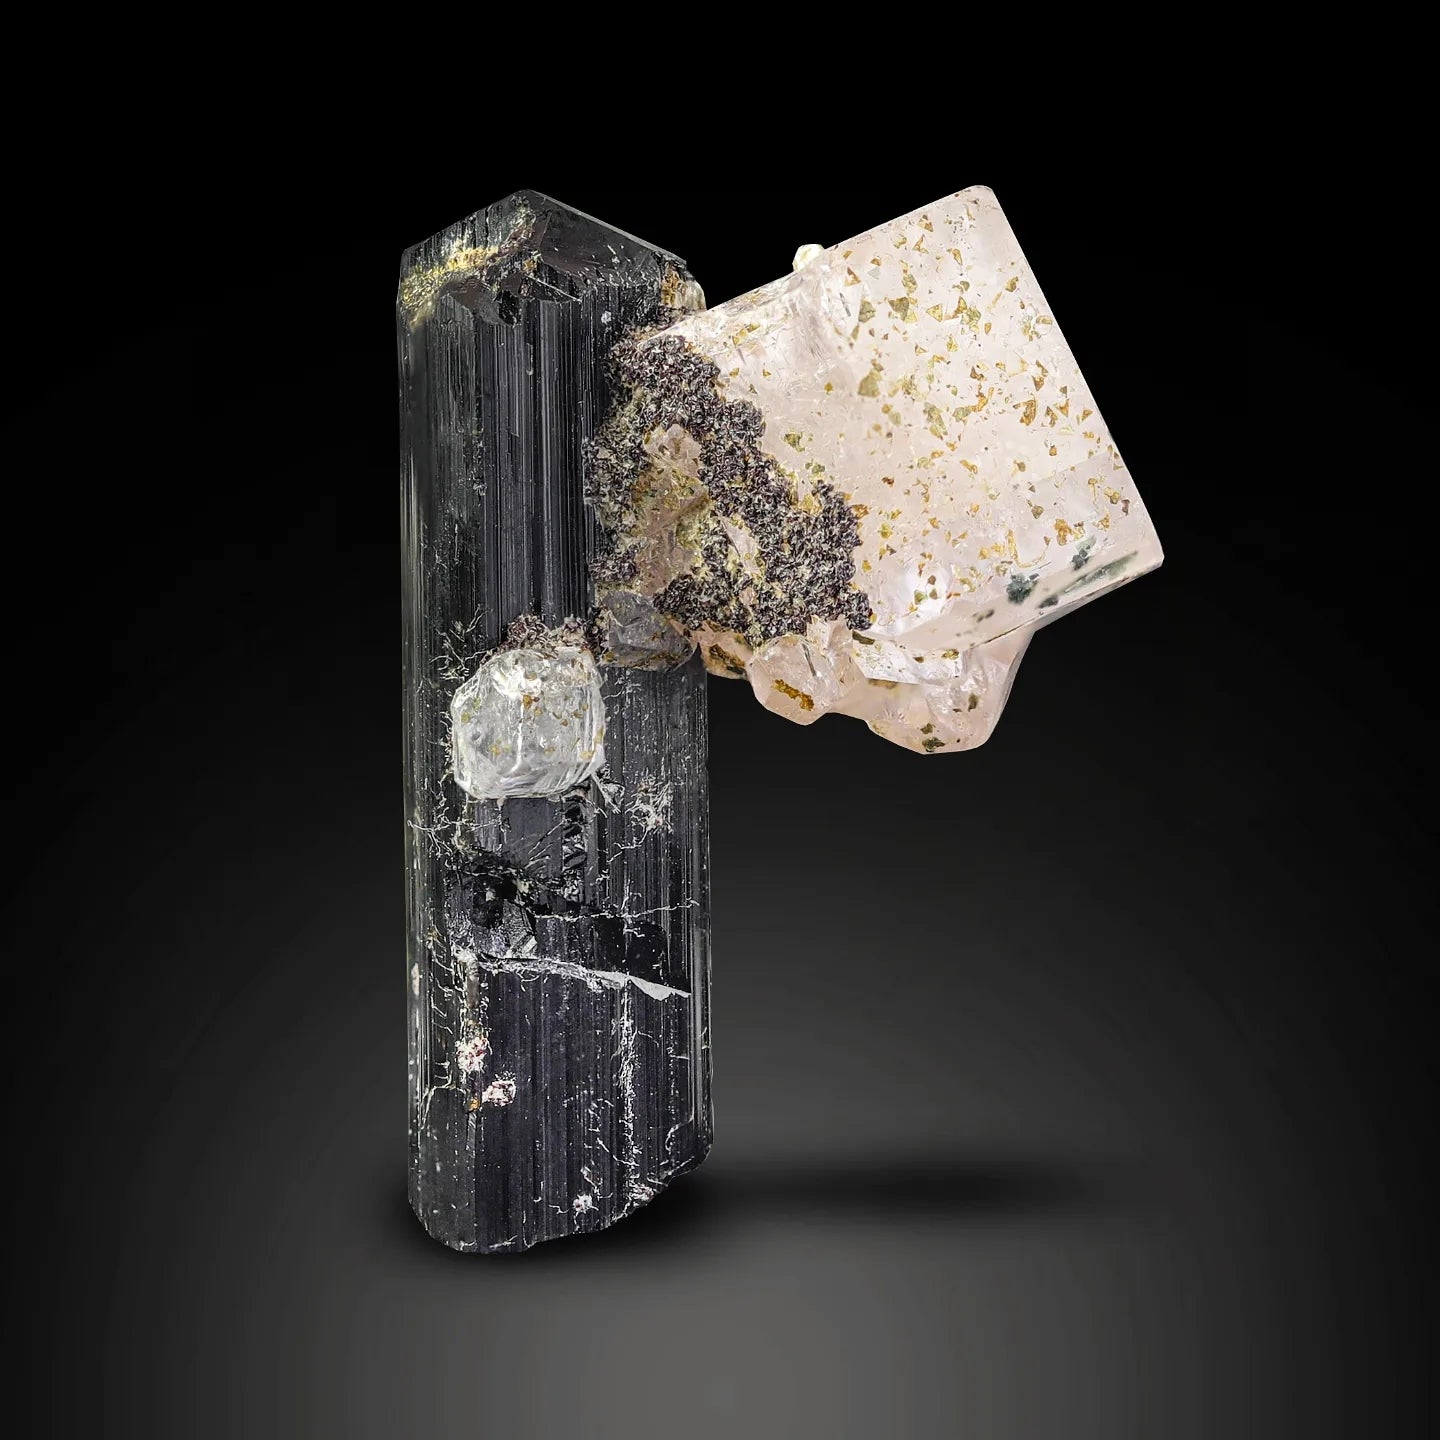 Gorgeous Pink Apatite Crystal Perched on Schorl Black Tourmaline from Pakistan